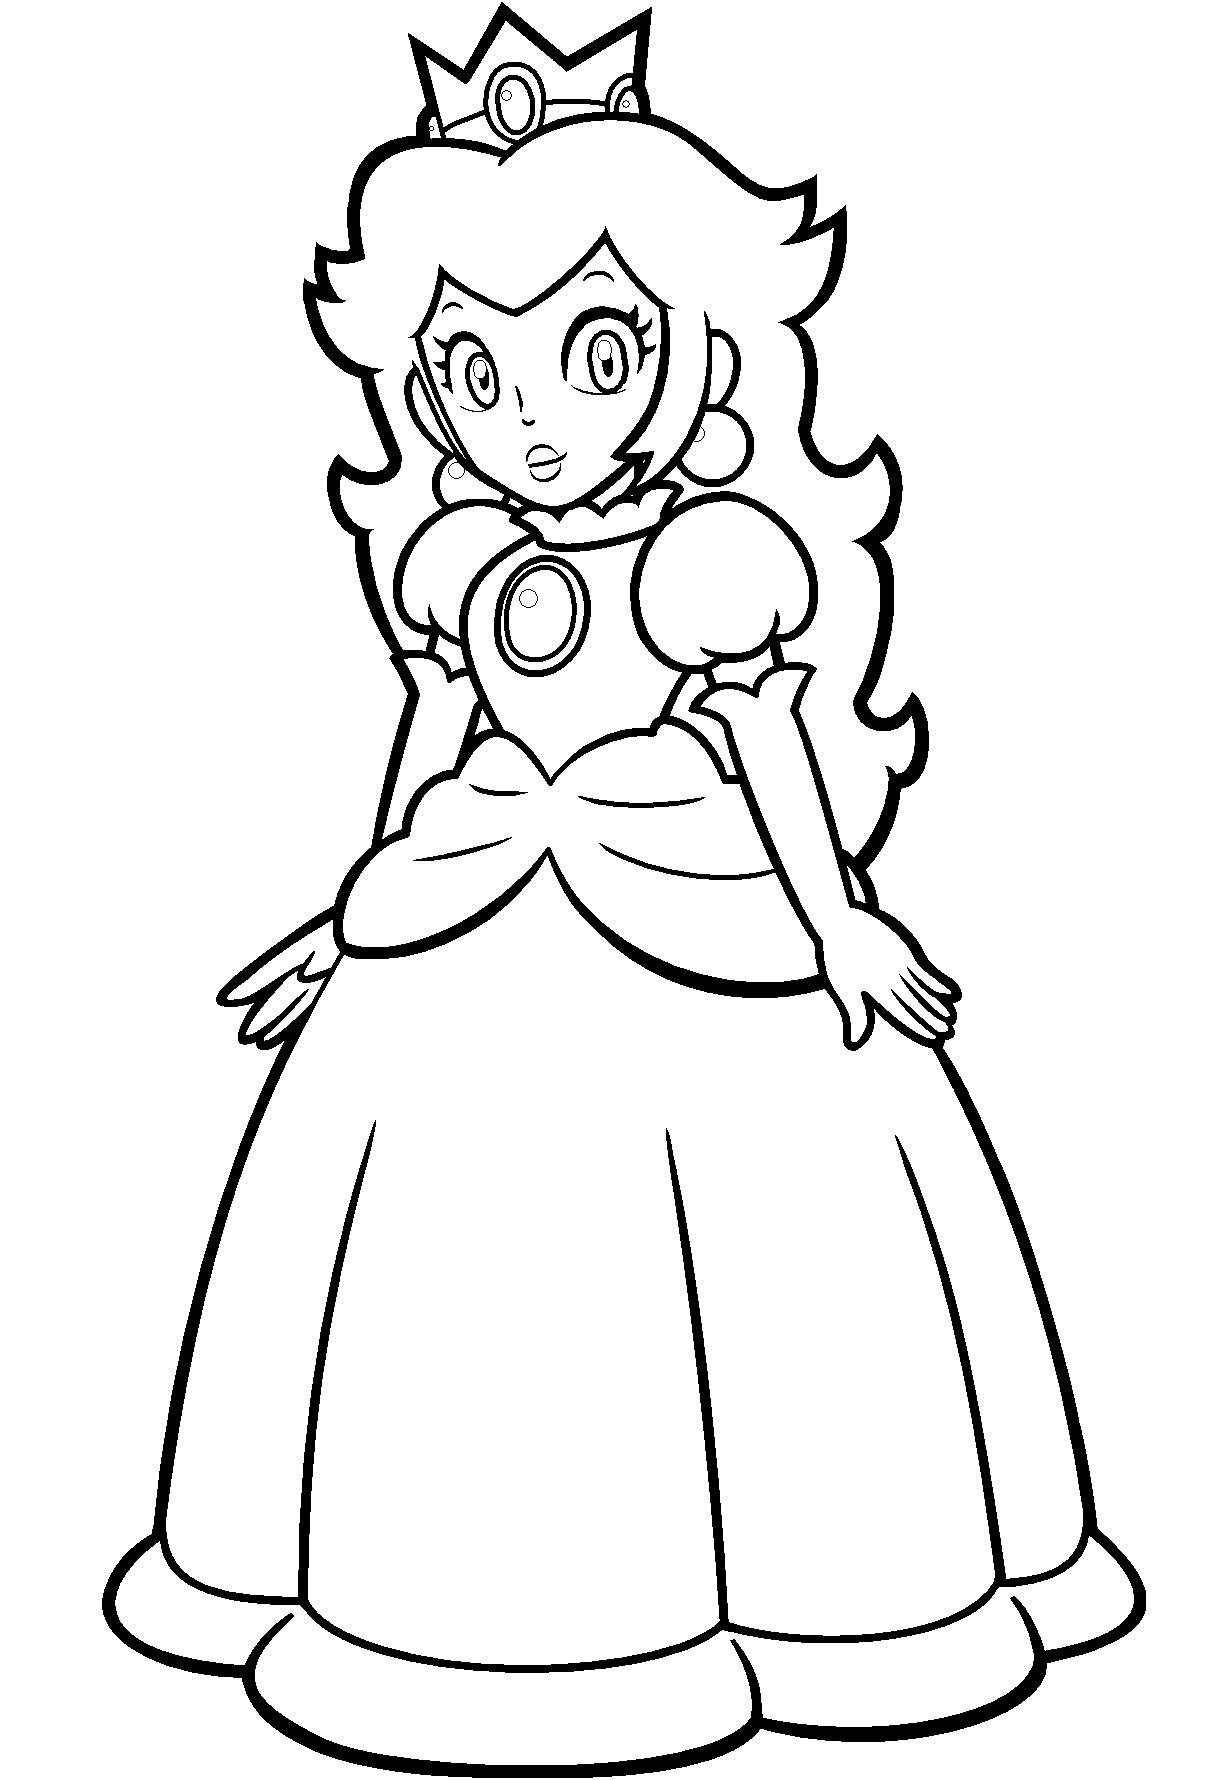 Beautiful Princess Peach from Super Mario Games Coloring Page